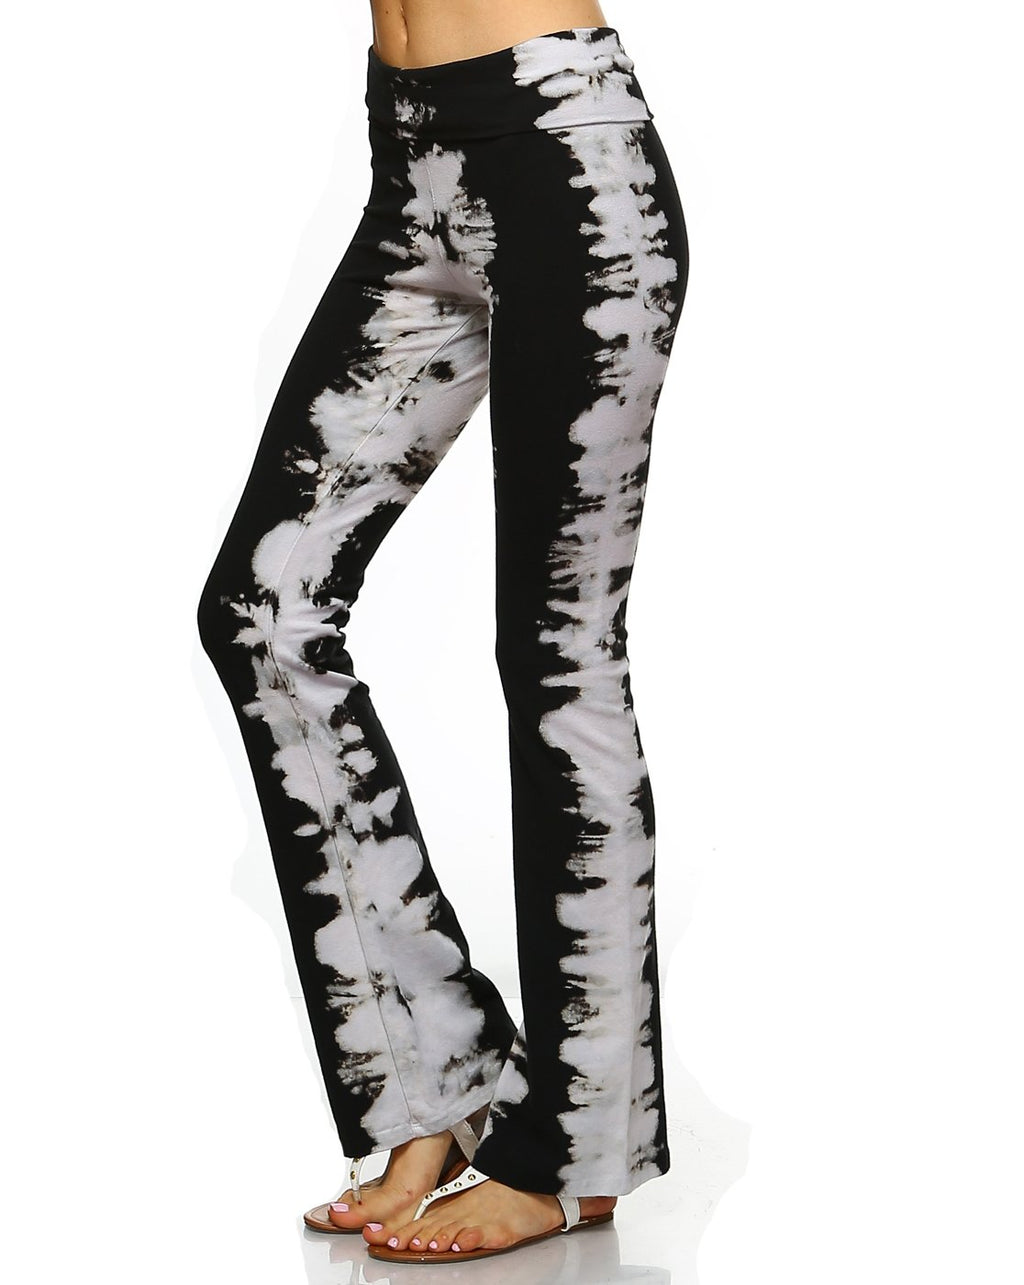 Black & Beige Skeletal Tie dye,Straight leg Yoga pant with fold over band